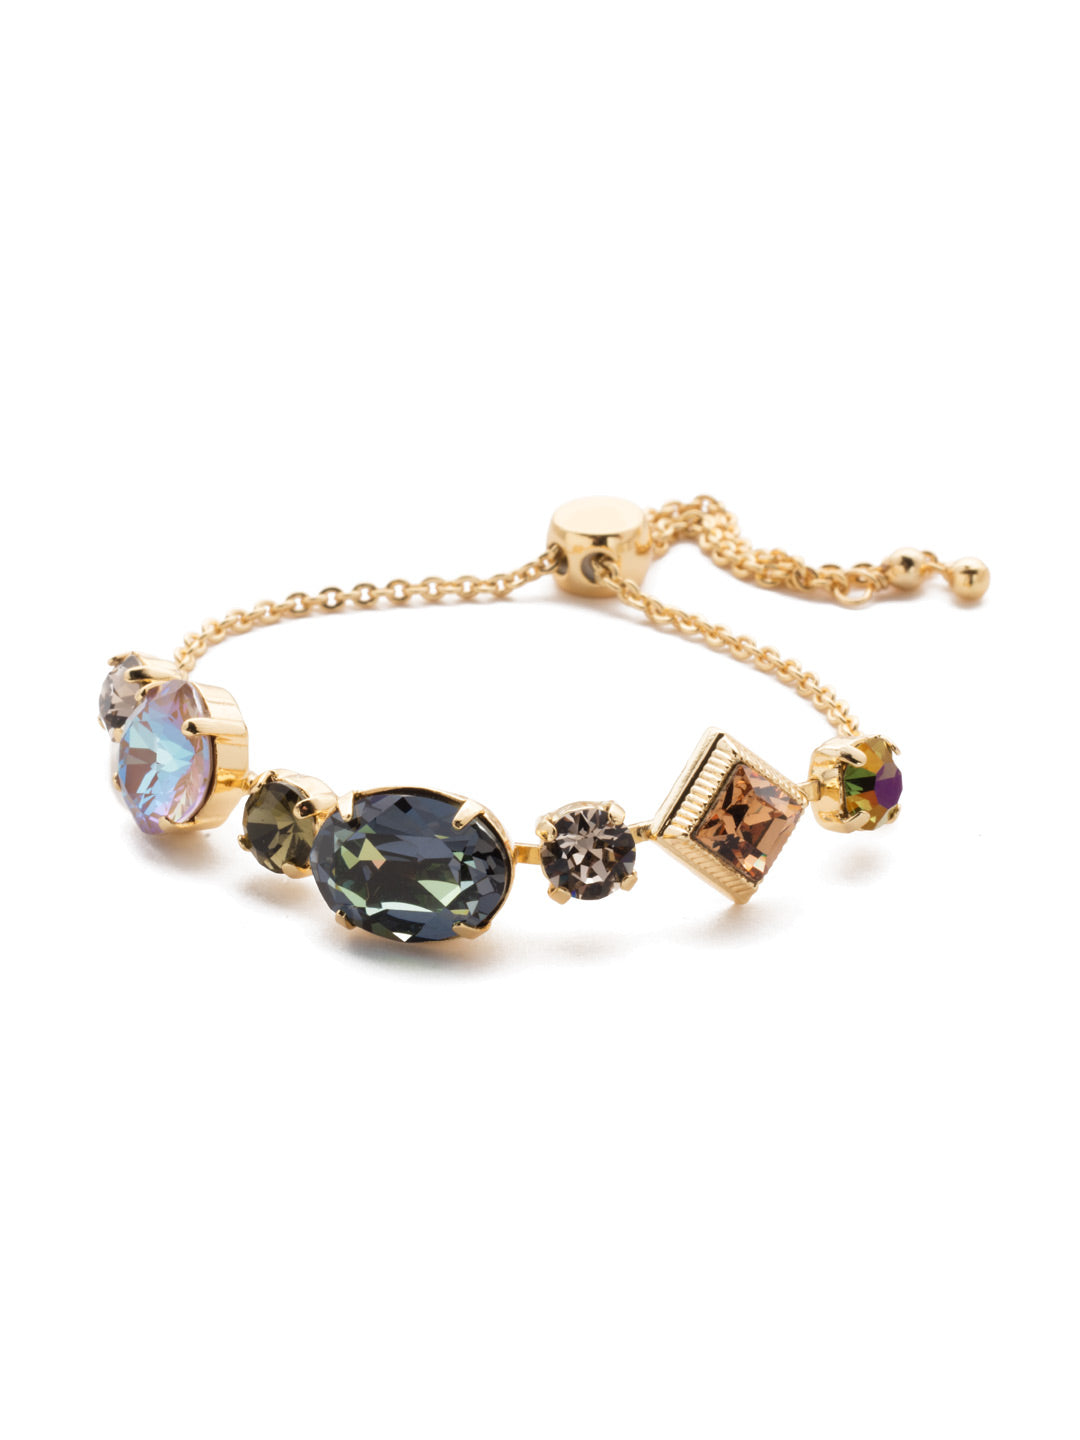 Primavera Slider Bracelet - BEA29BGCSM - A variety of unique, beautiful crystals adorn our charming Primavera classic bracelet, with a delicate chain that can be adjusted to fit every wrist perfectly. From Sorrelli's Cashmere collection in our Bright Gold-tone finish.